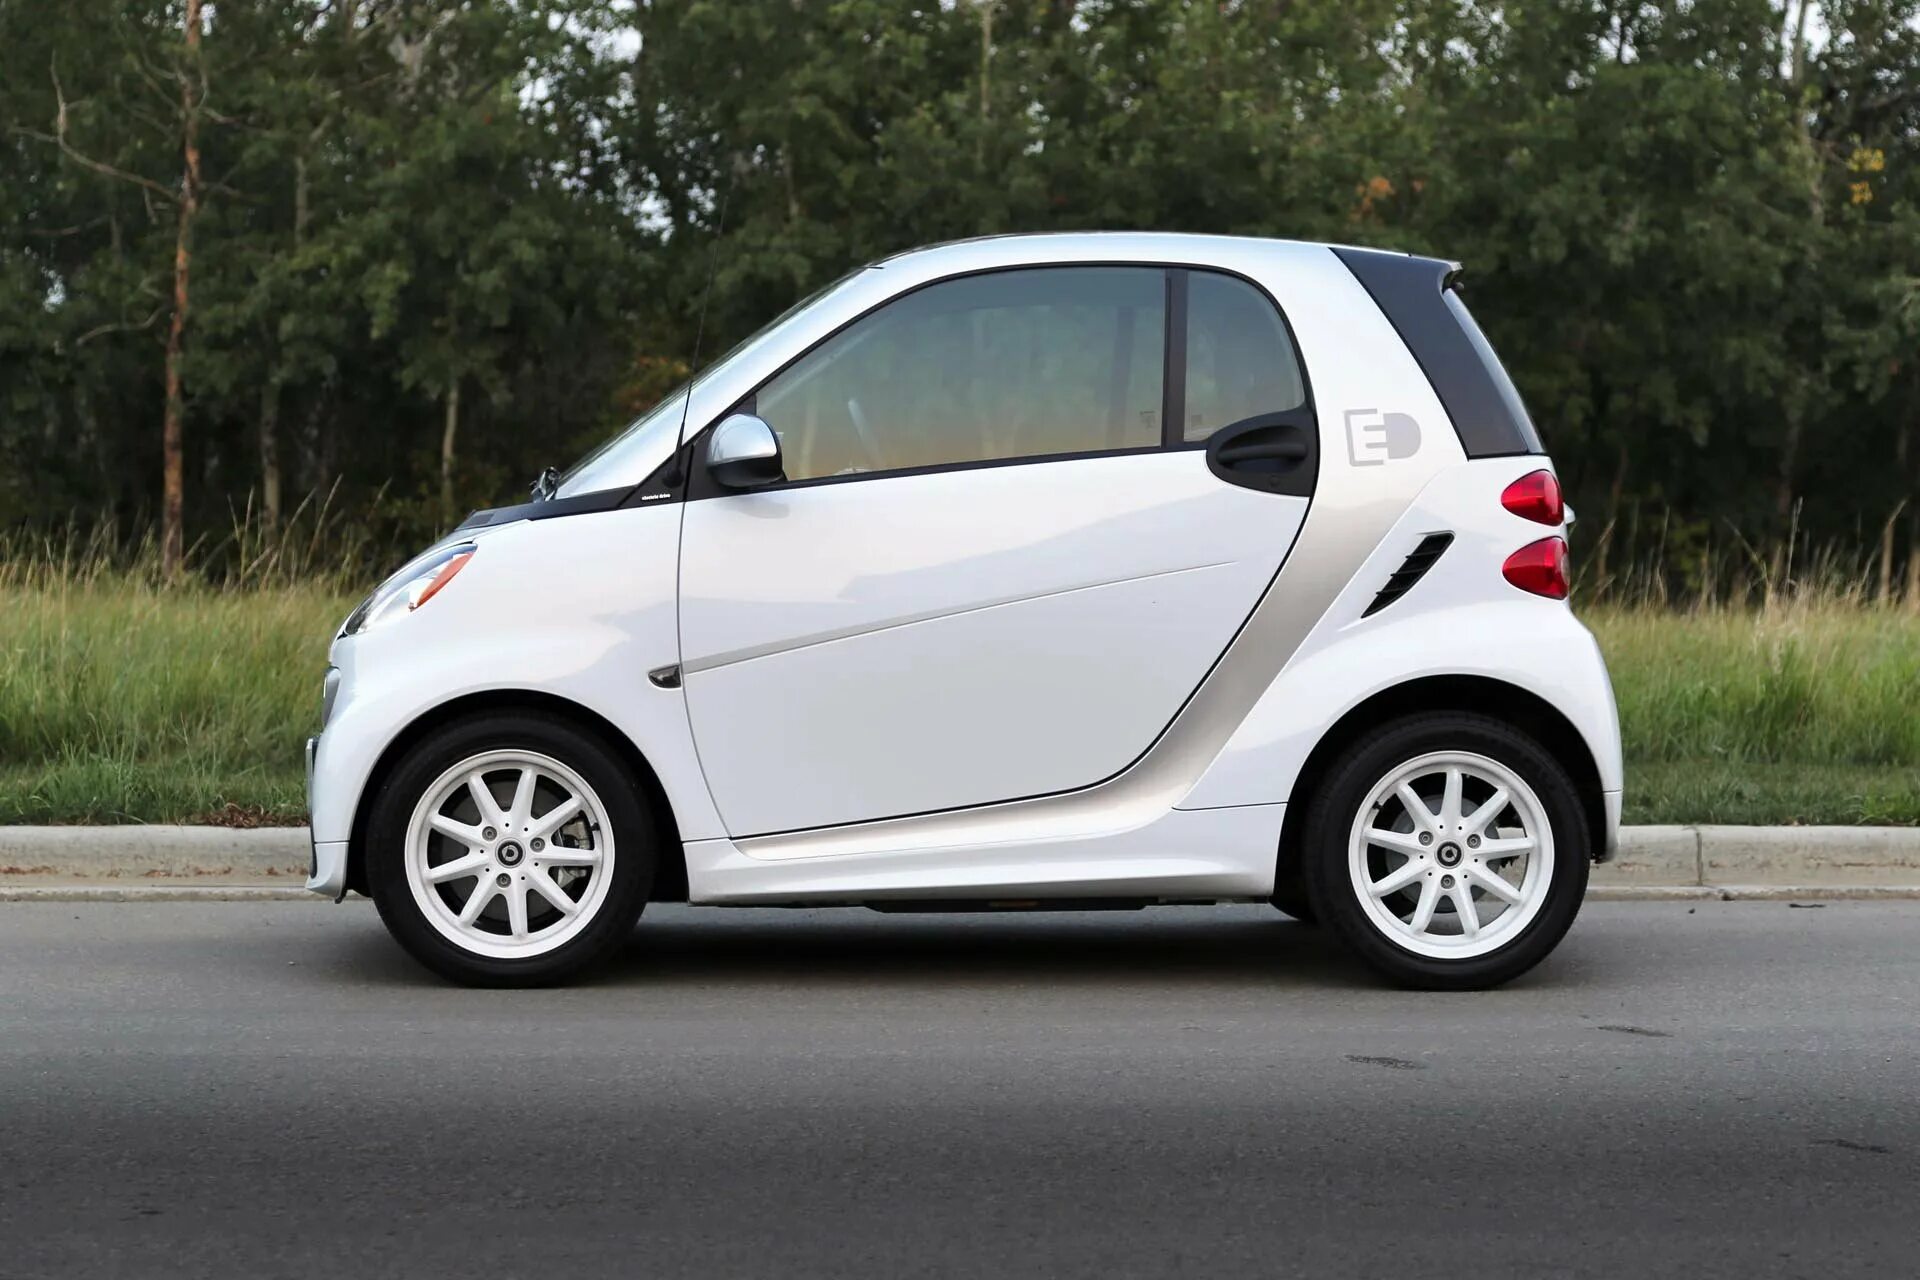 Smart Fortwo 2015. Car Smart Fortwo 2015. Мини-кар Smart Fortwo 2. Мерседес 2 местный смарт.